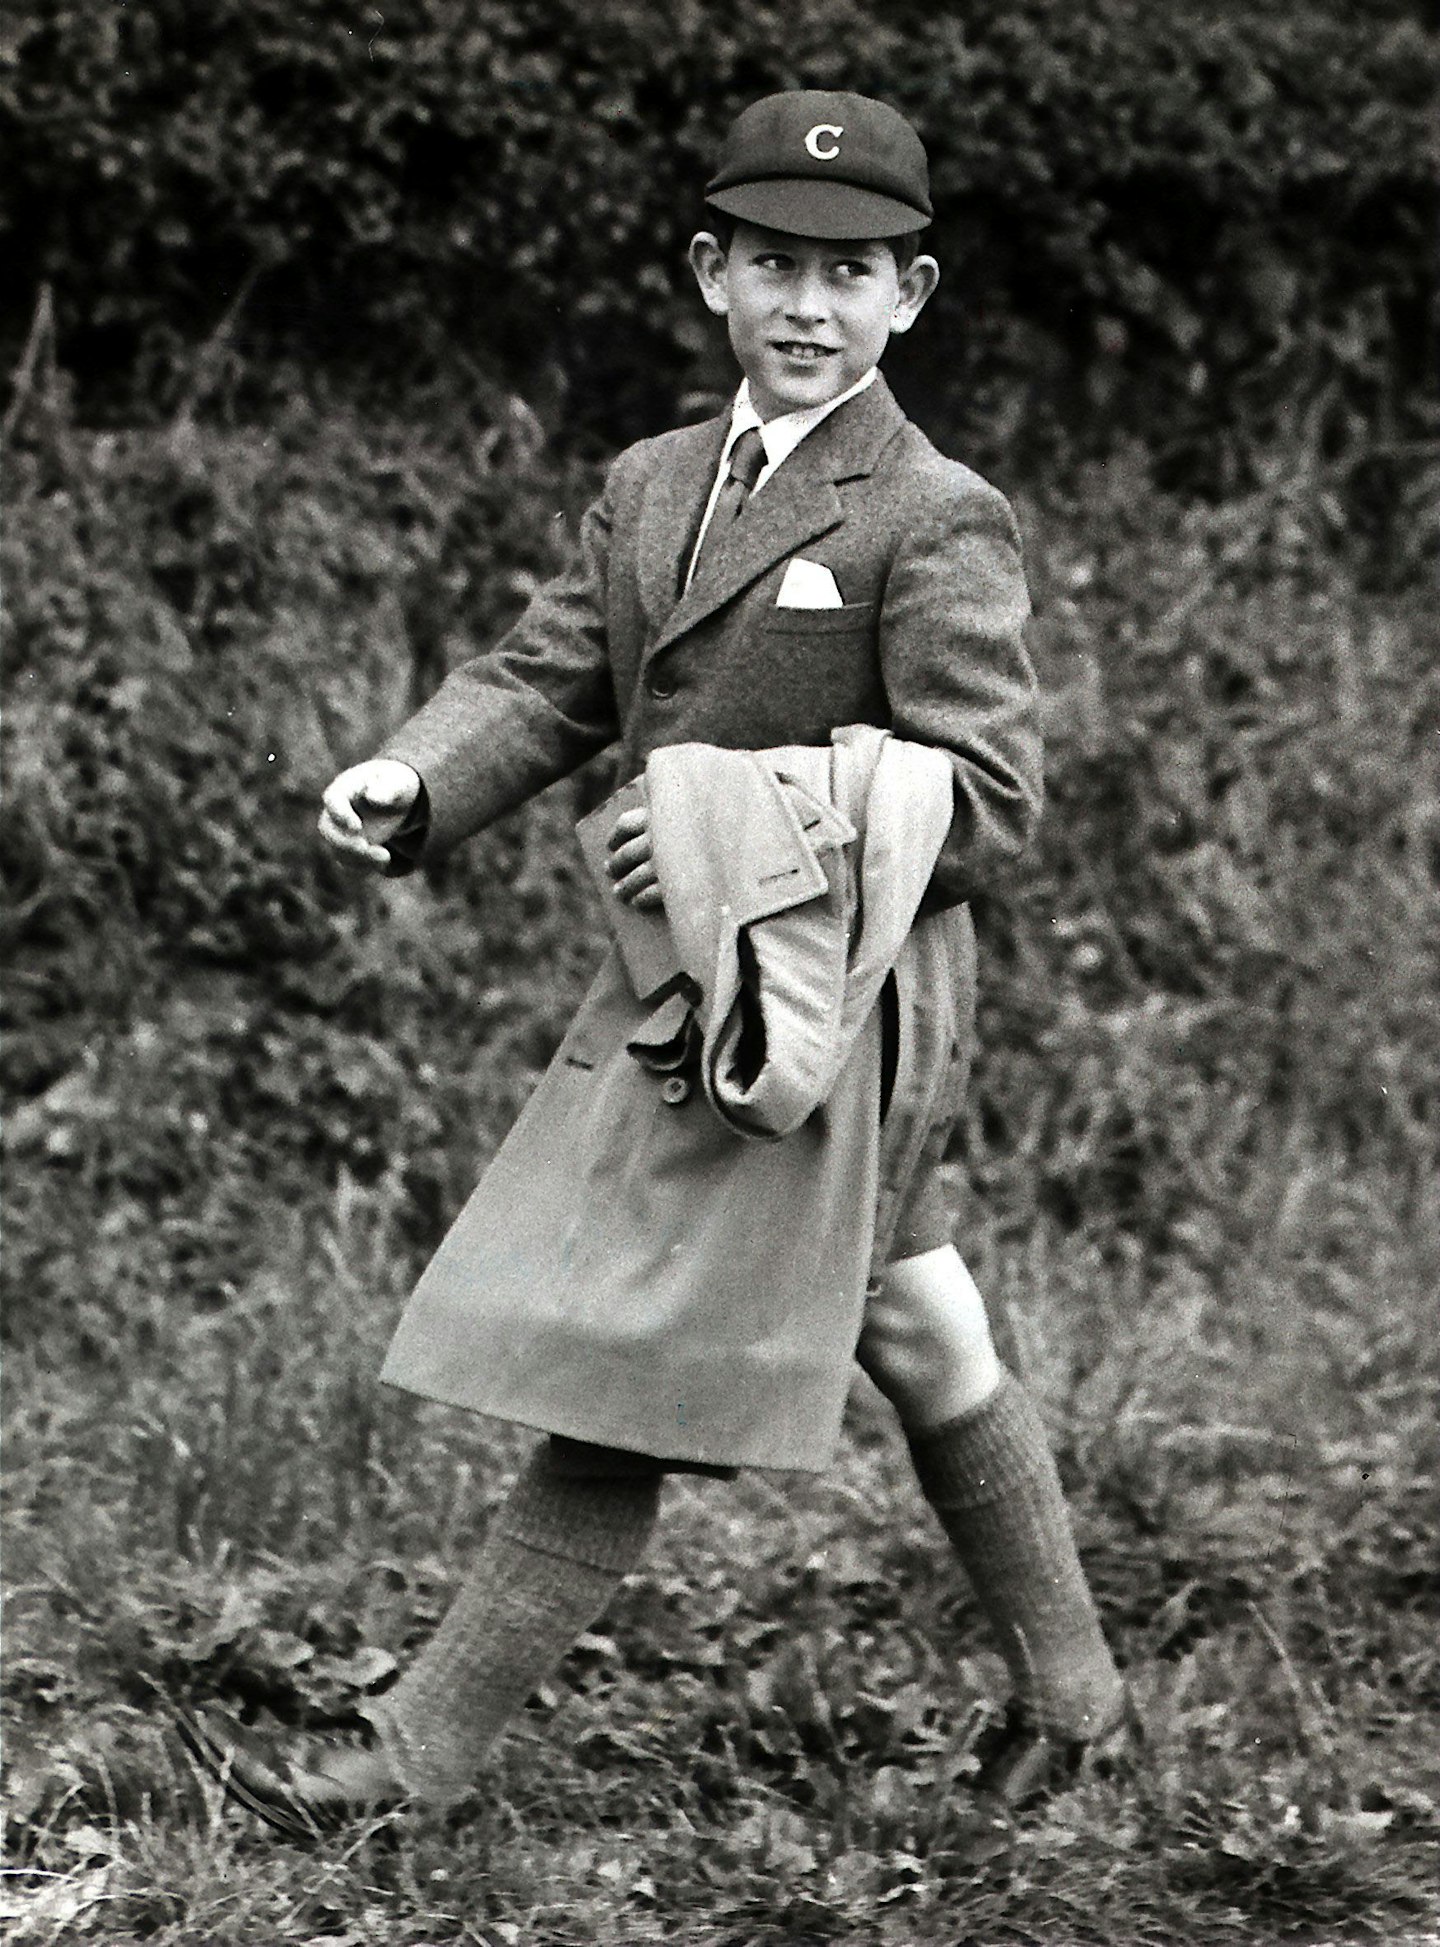 Young Prince Charles in his school uniform.